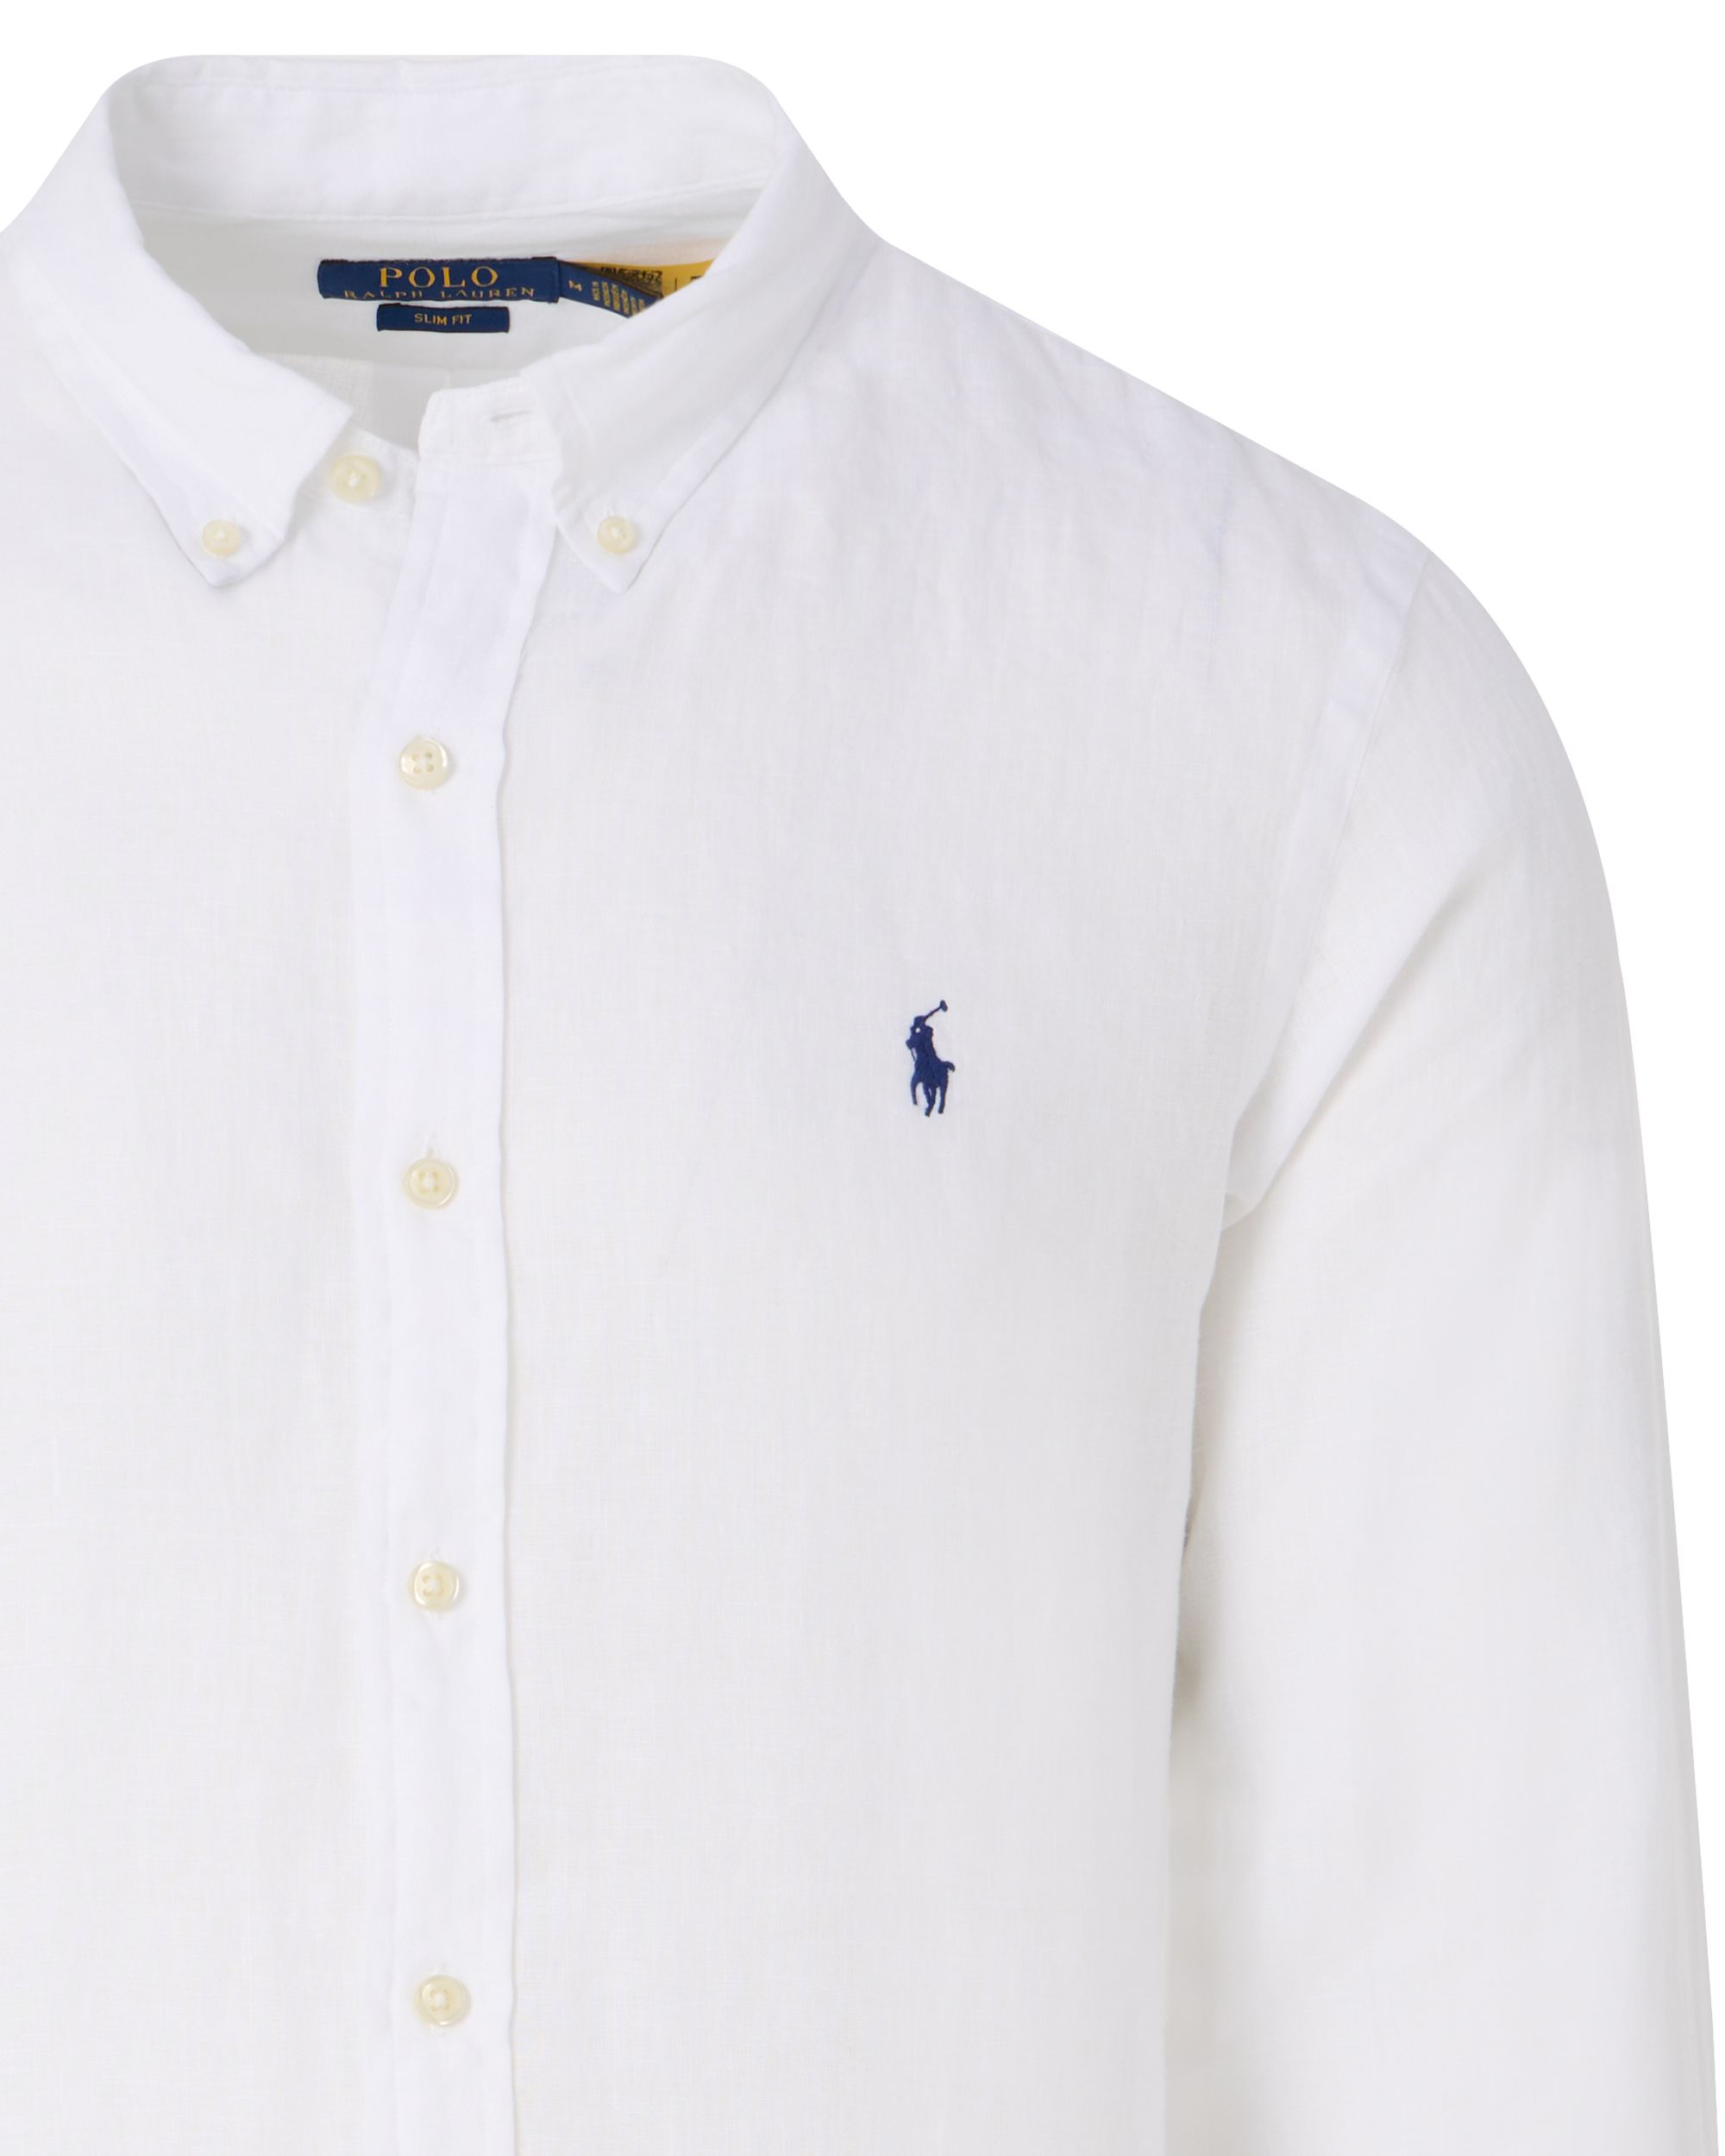 Polo Ralph Lauren Casual Overhemd LM Wit 064617-001-L